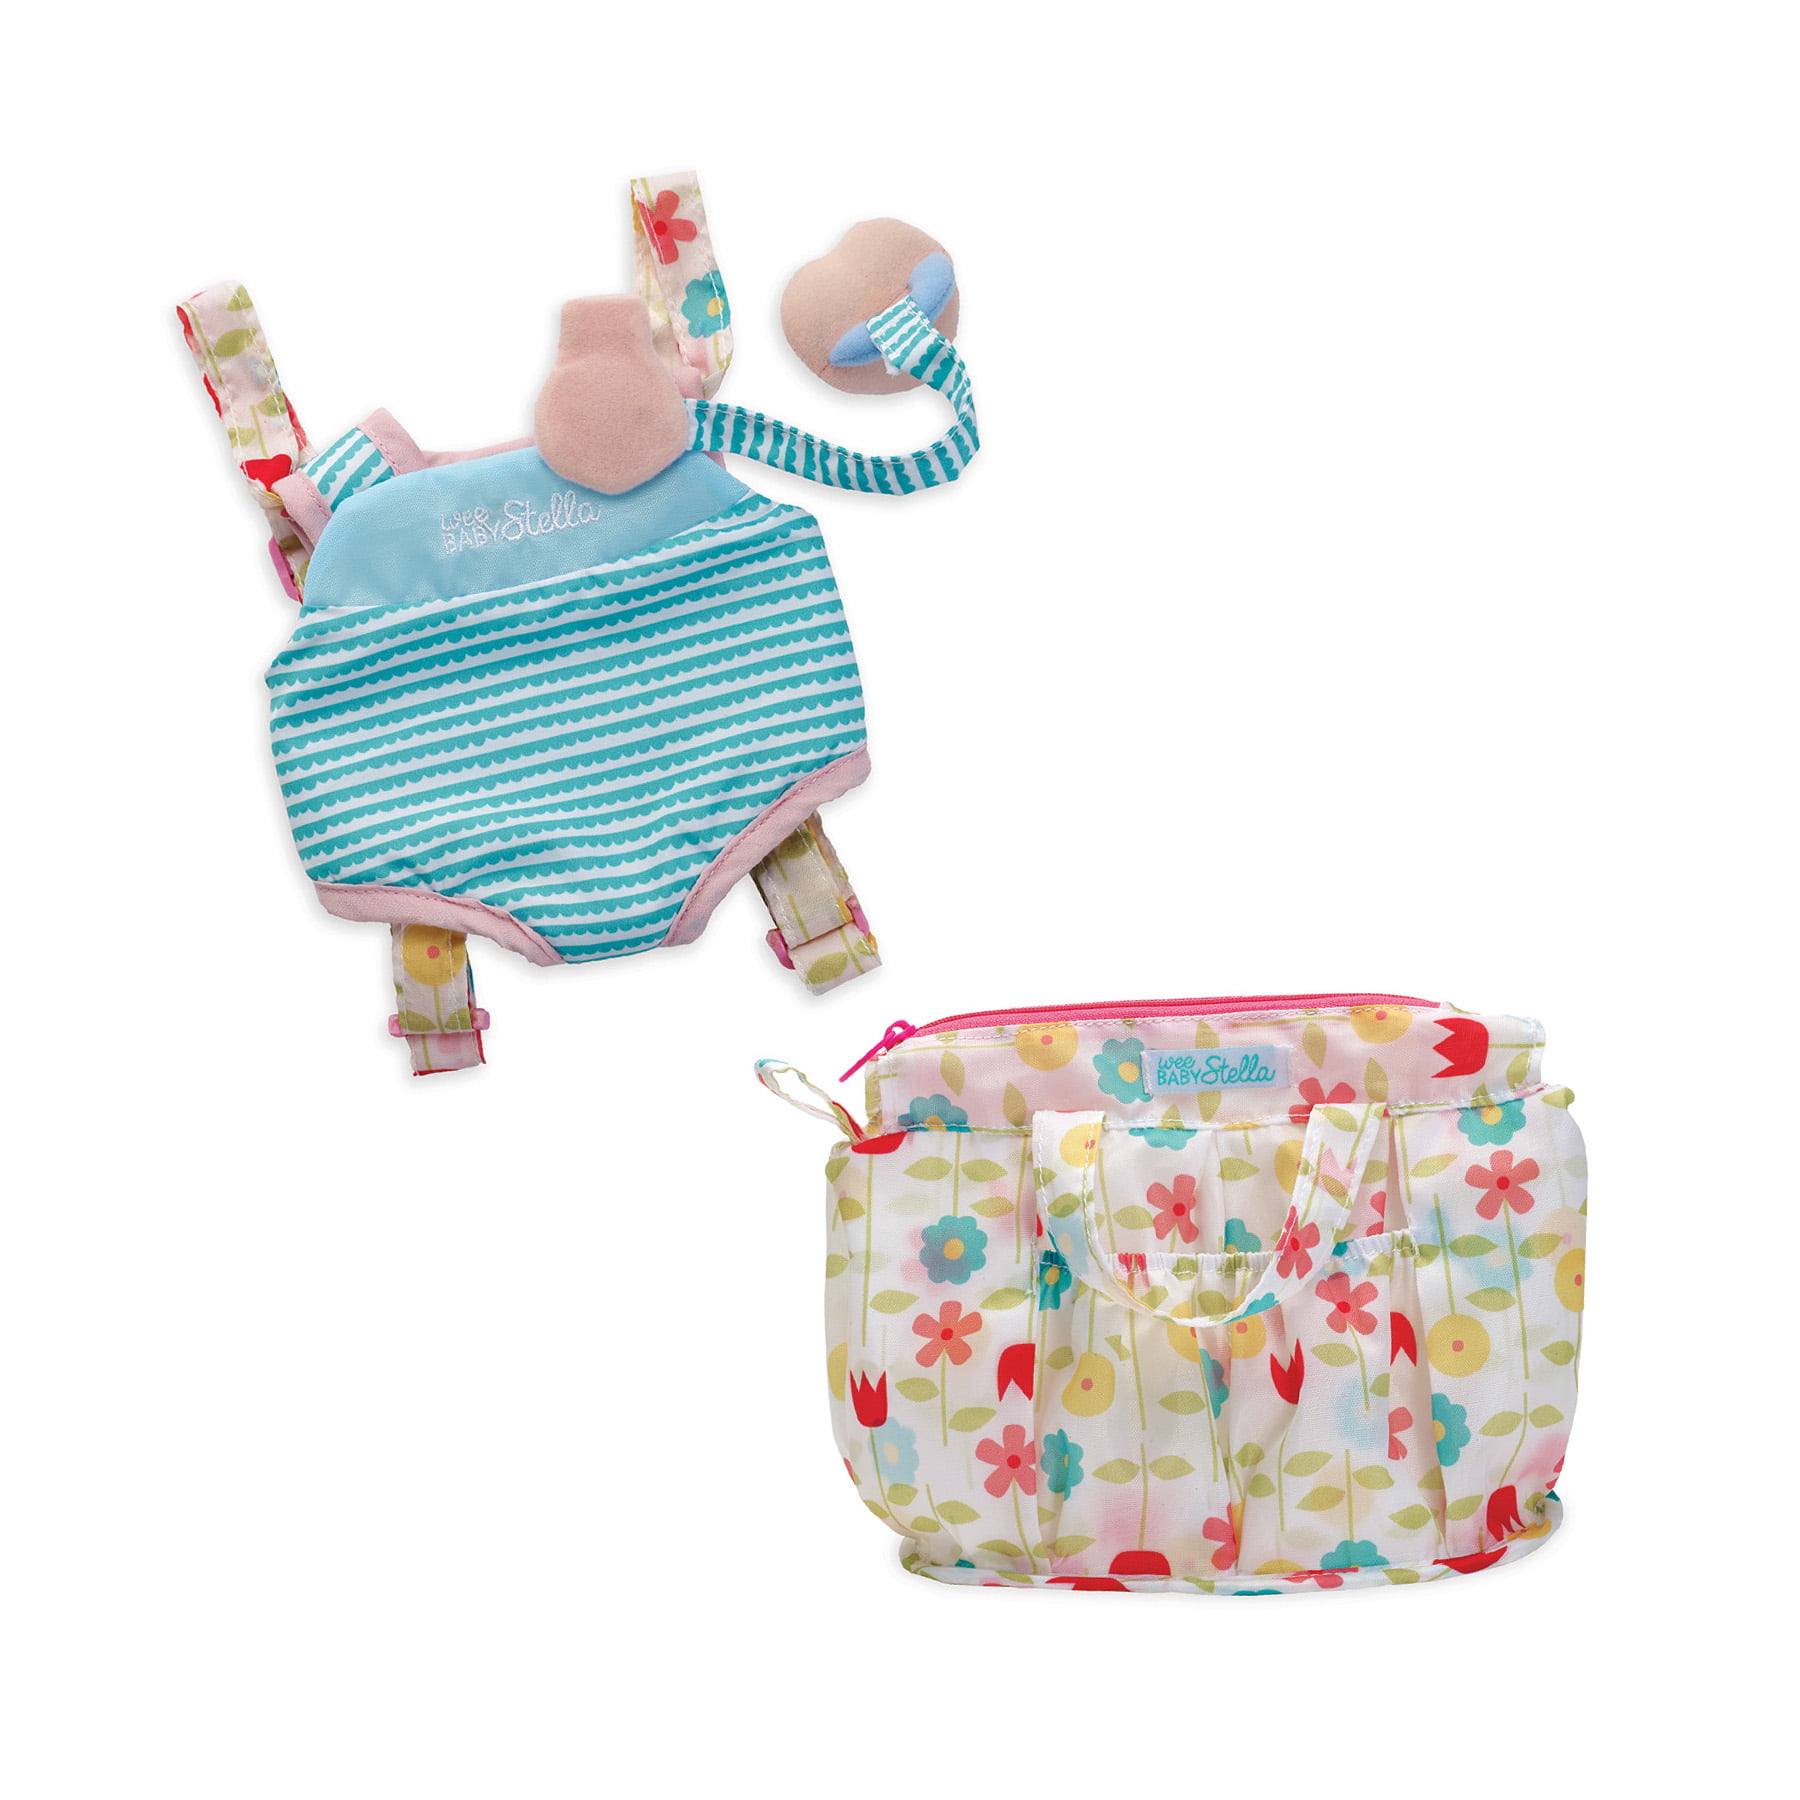 Manhattan Toy Wee Baby Stella Diaper Changing Soft Baby Doll Accessory Set for 12 Dolls